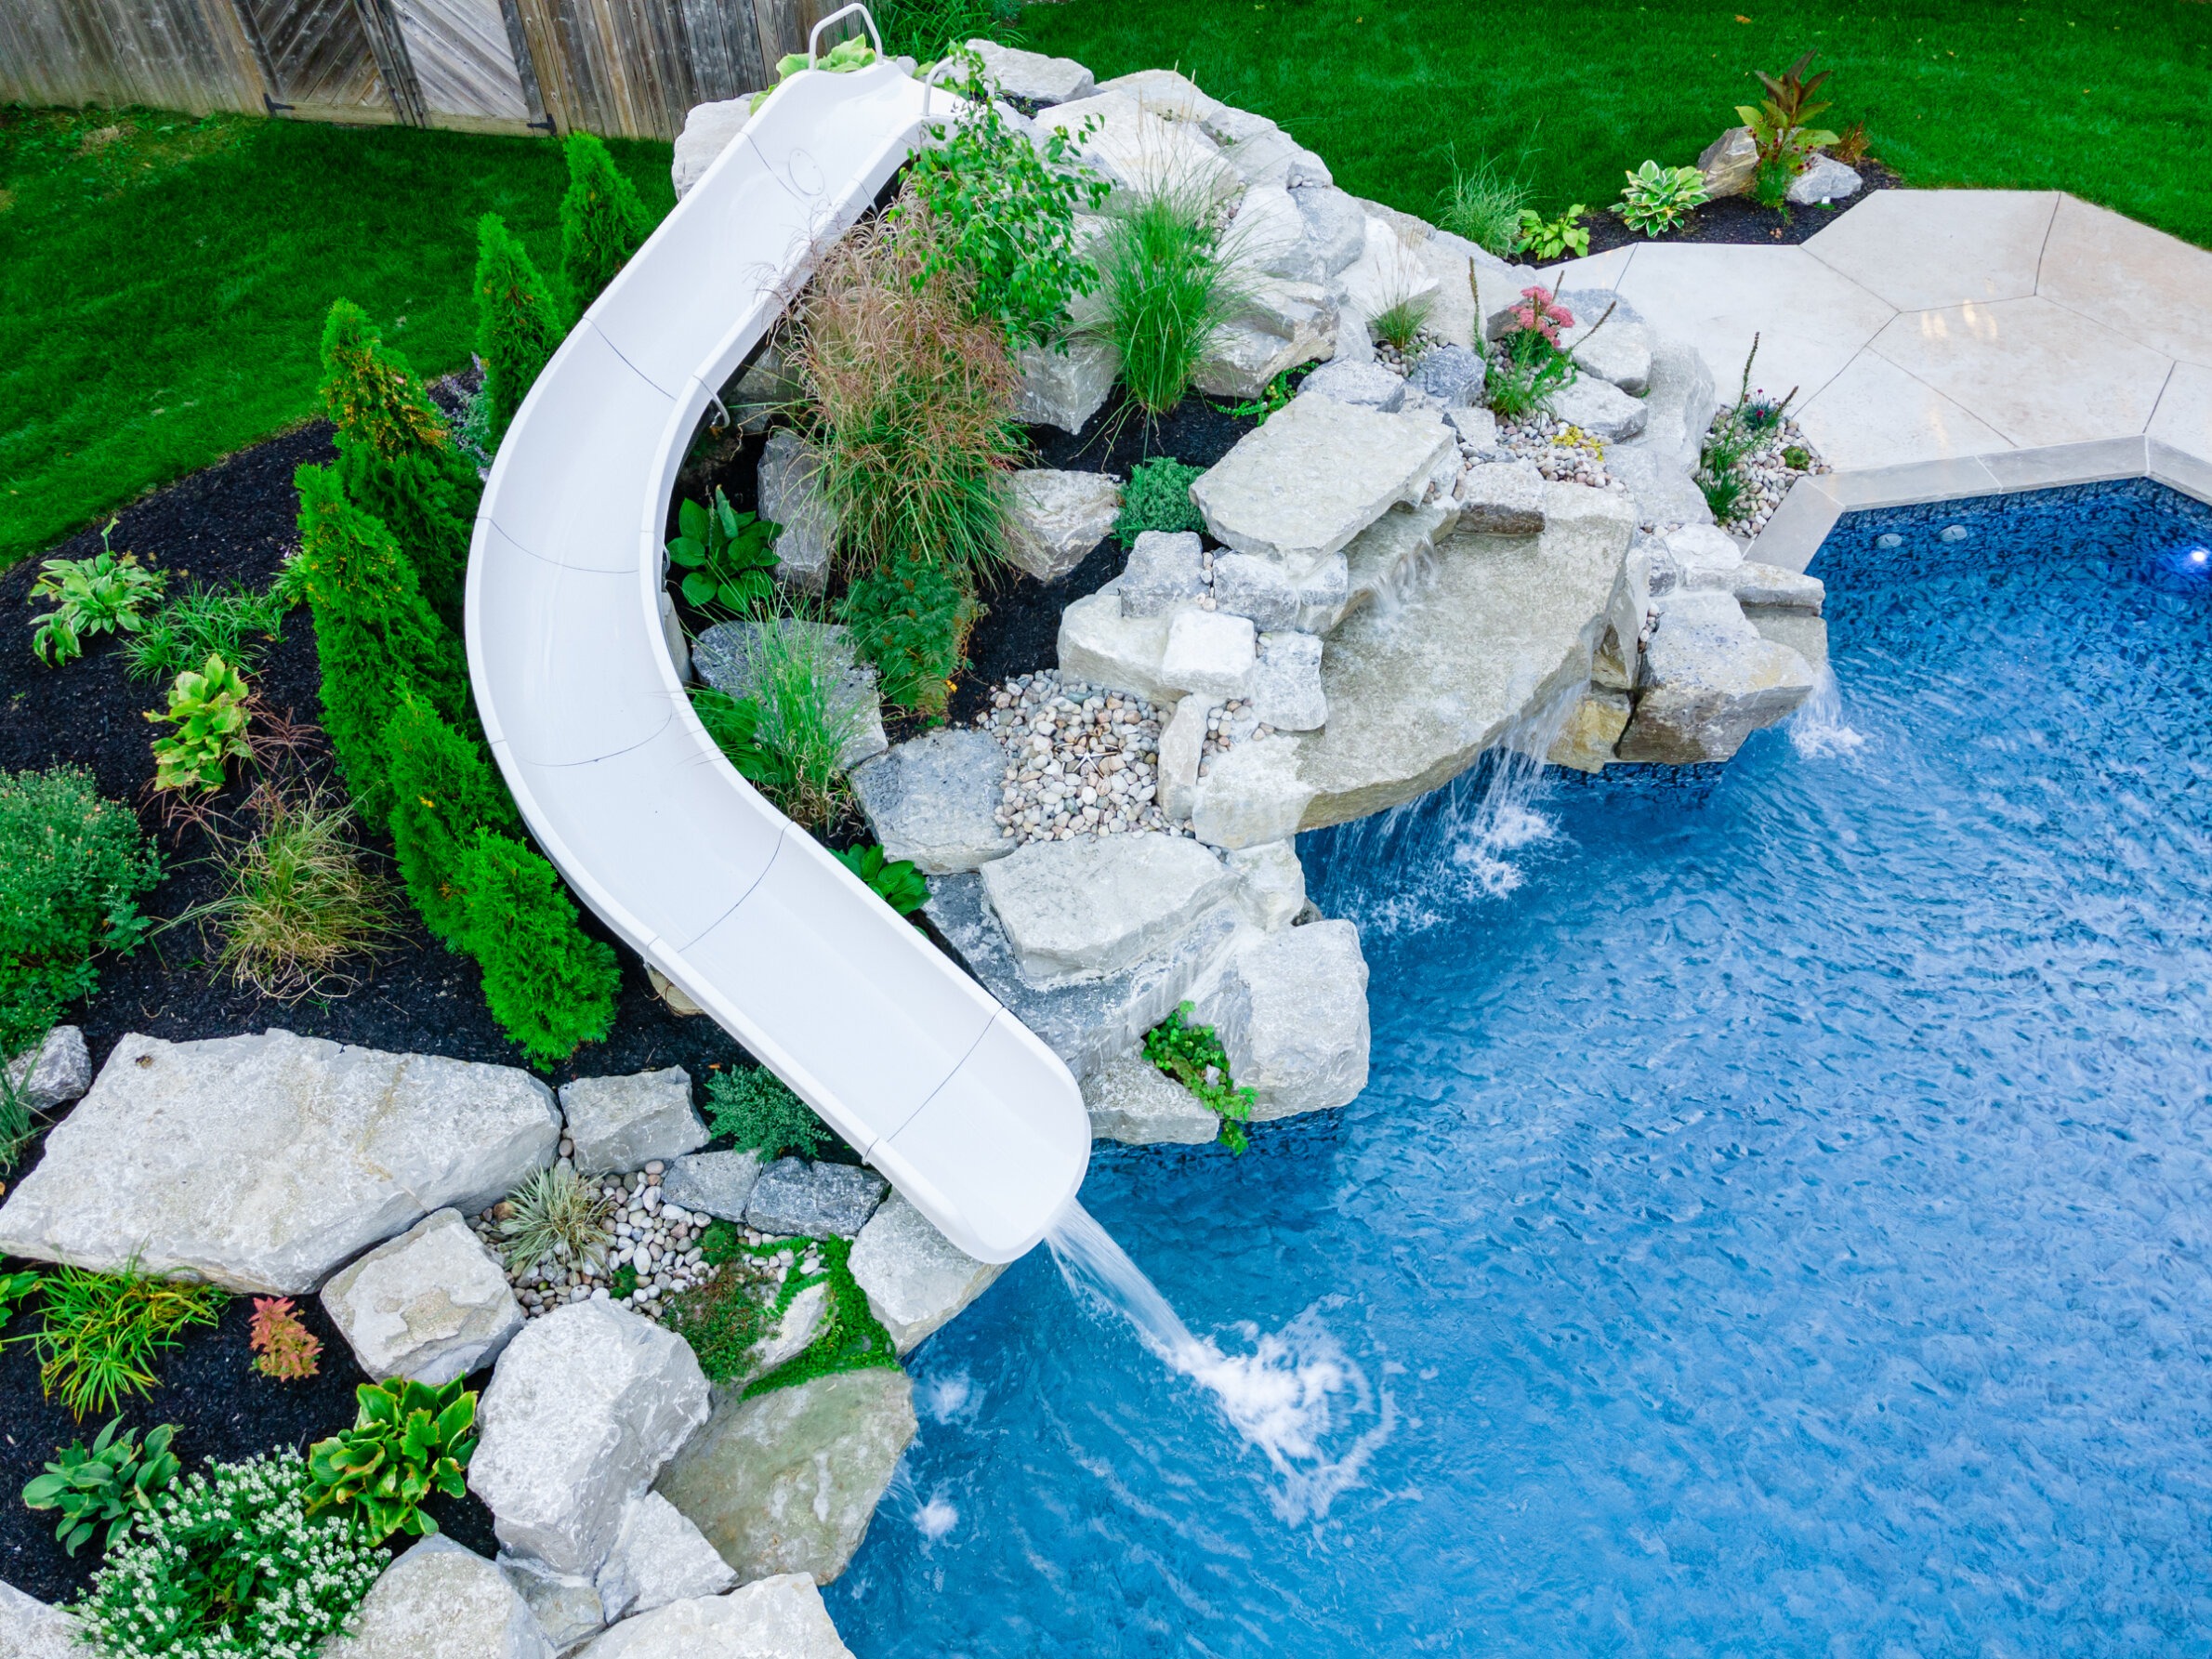 An aerial view of a backyard with a white slide descending into a blue swimming pool, surrounded by rocks and landscaping with green plants.